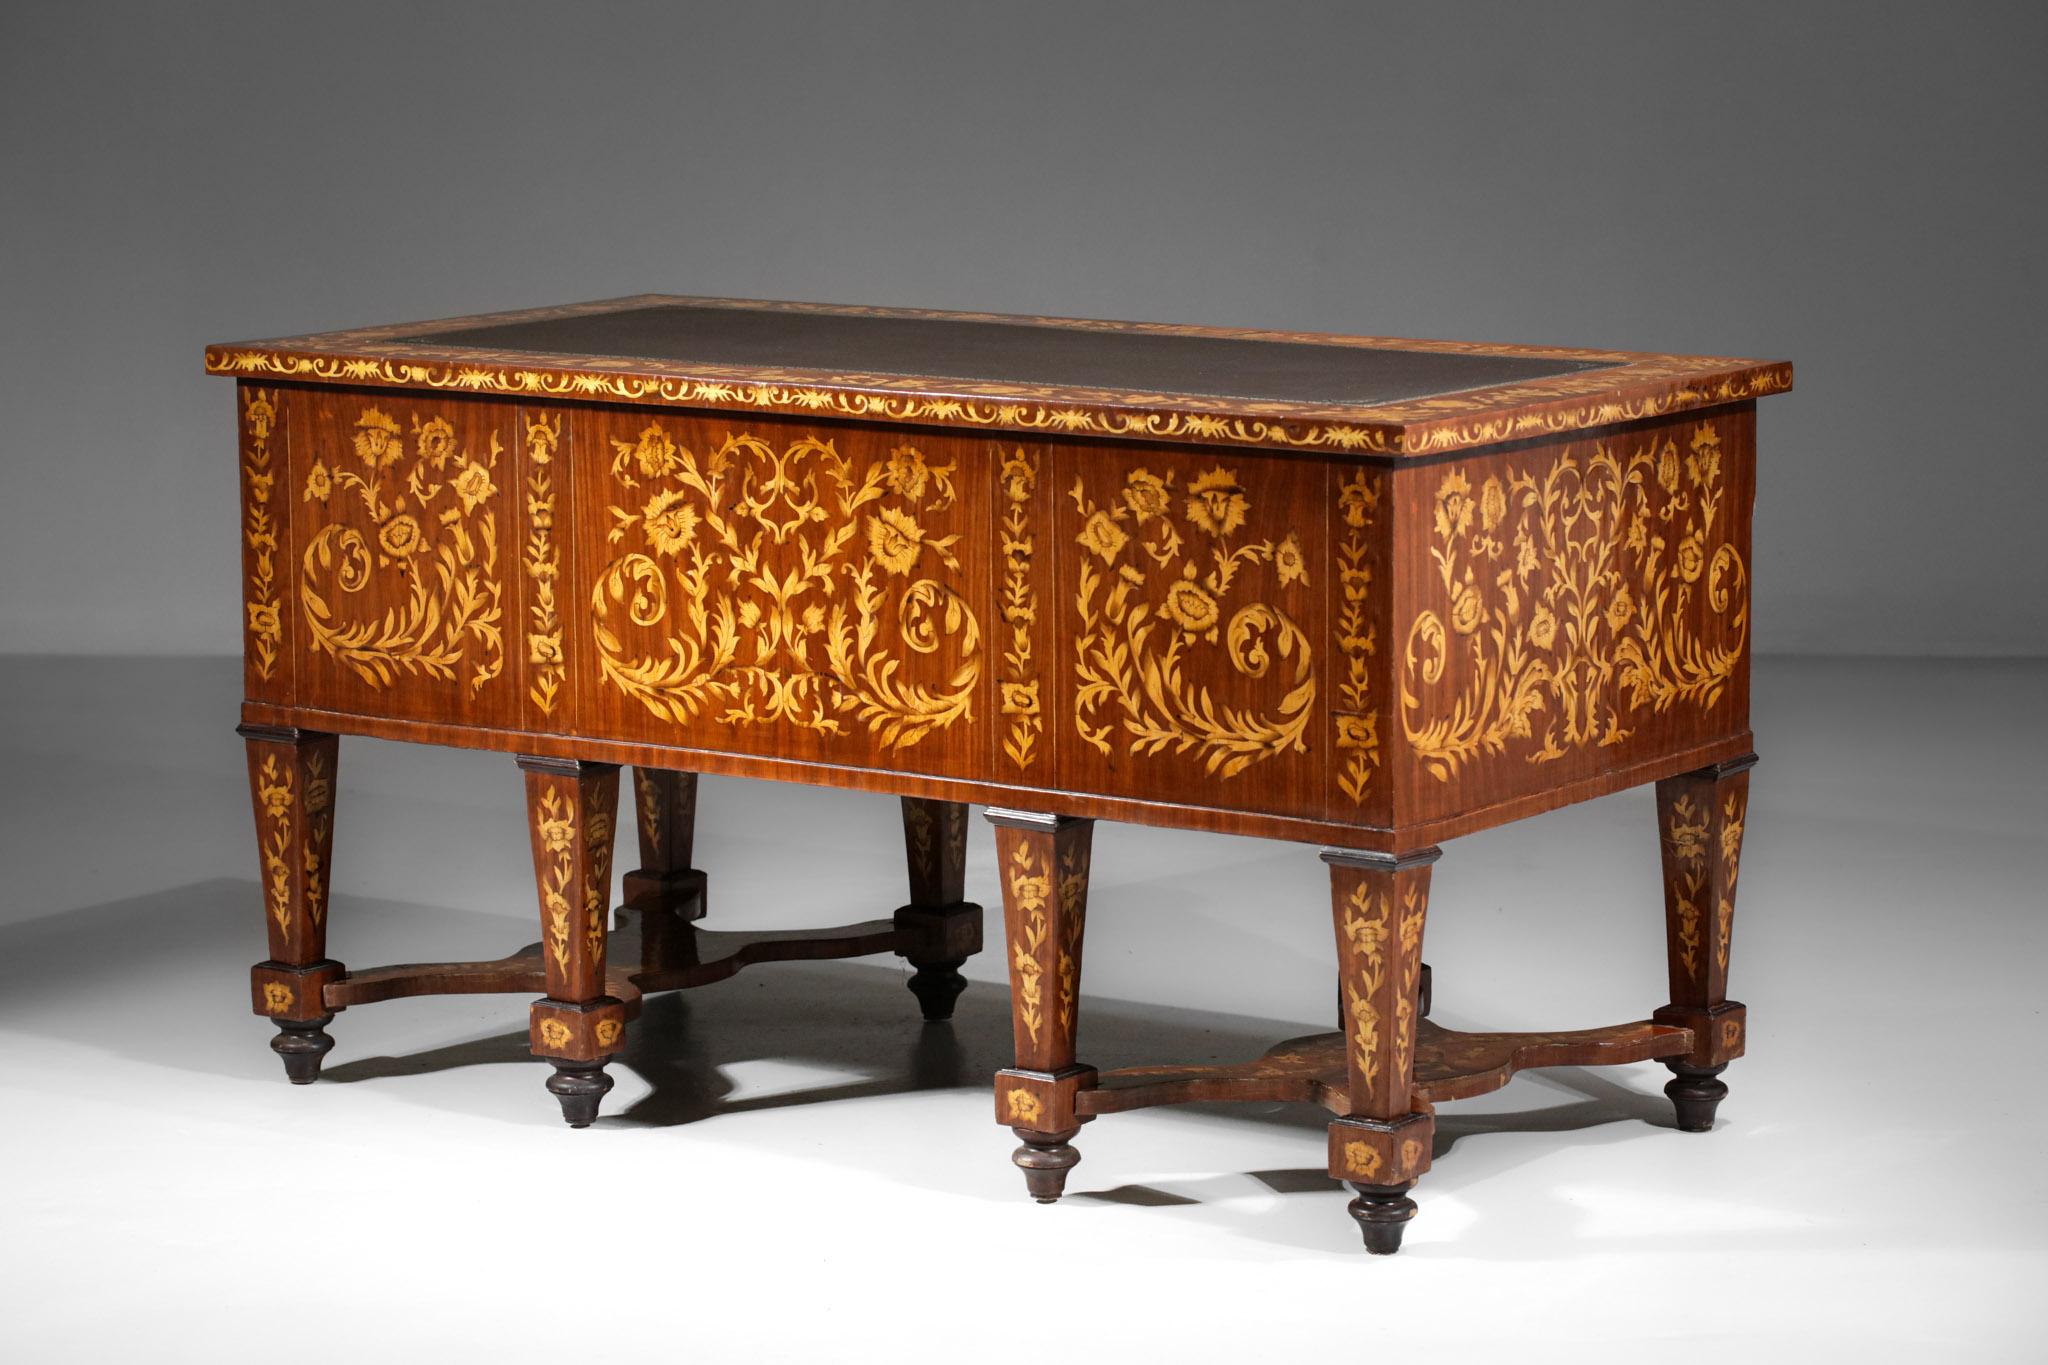 Mazarin Style Desk in Solid Wood and Floral Marquetry, F419 7